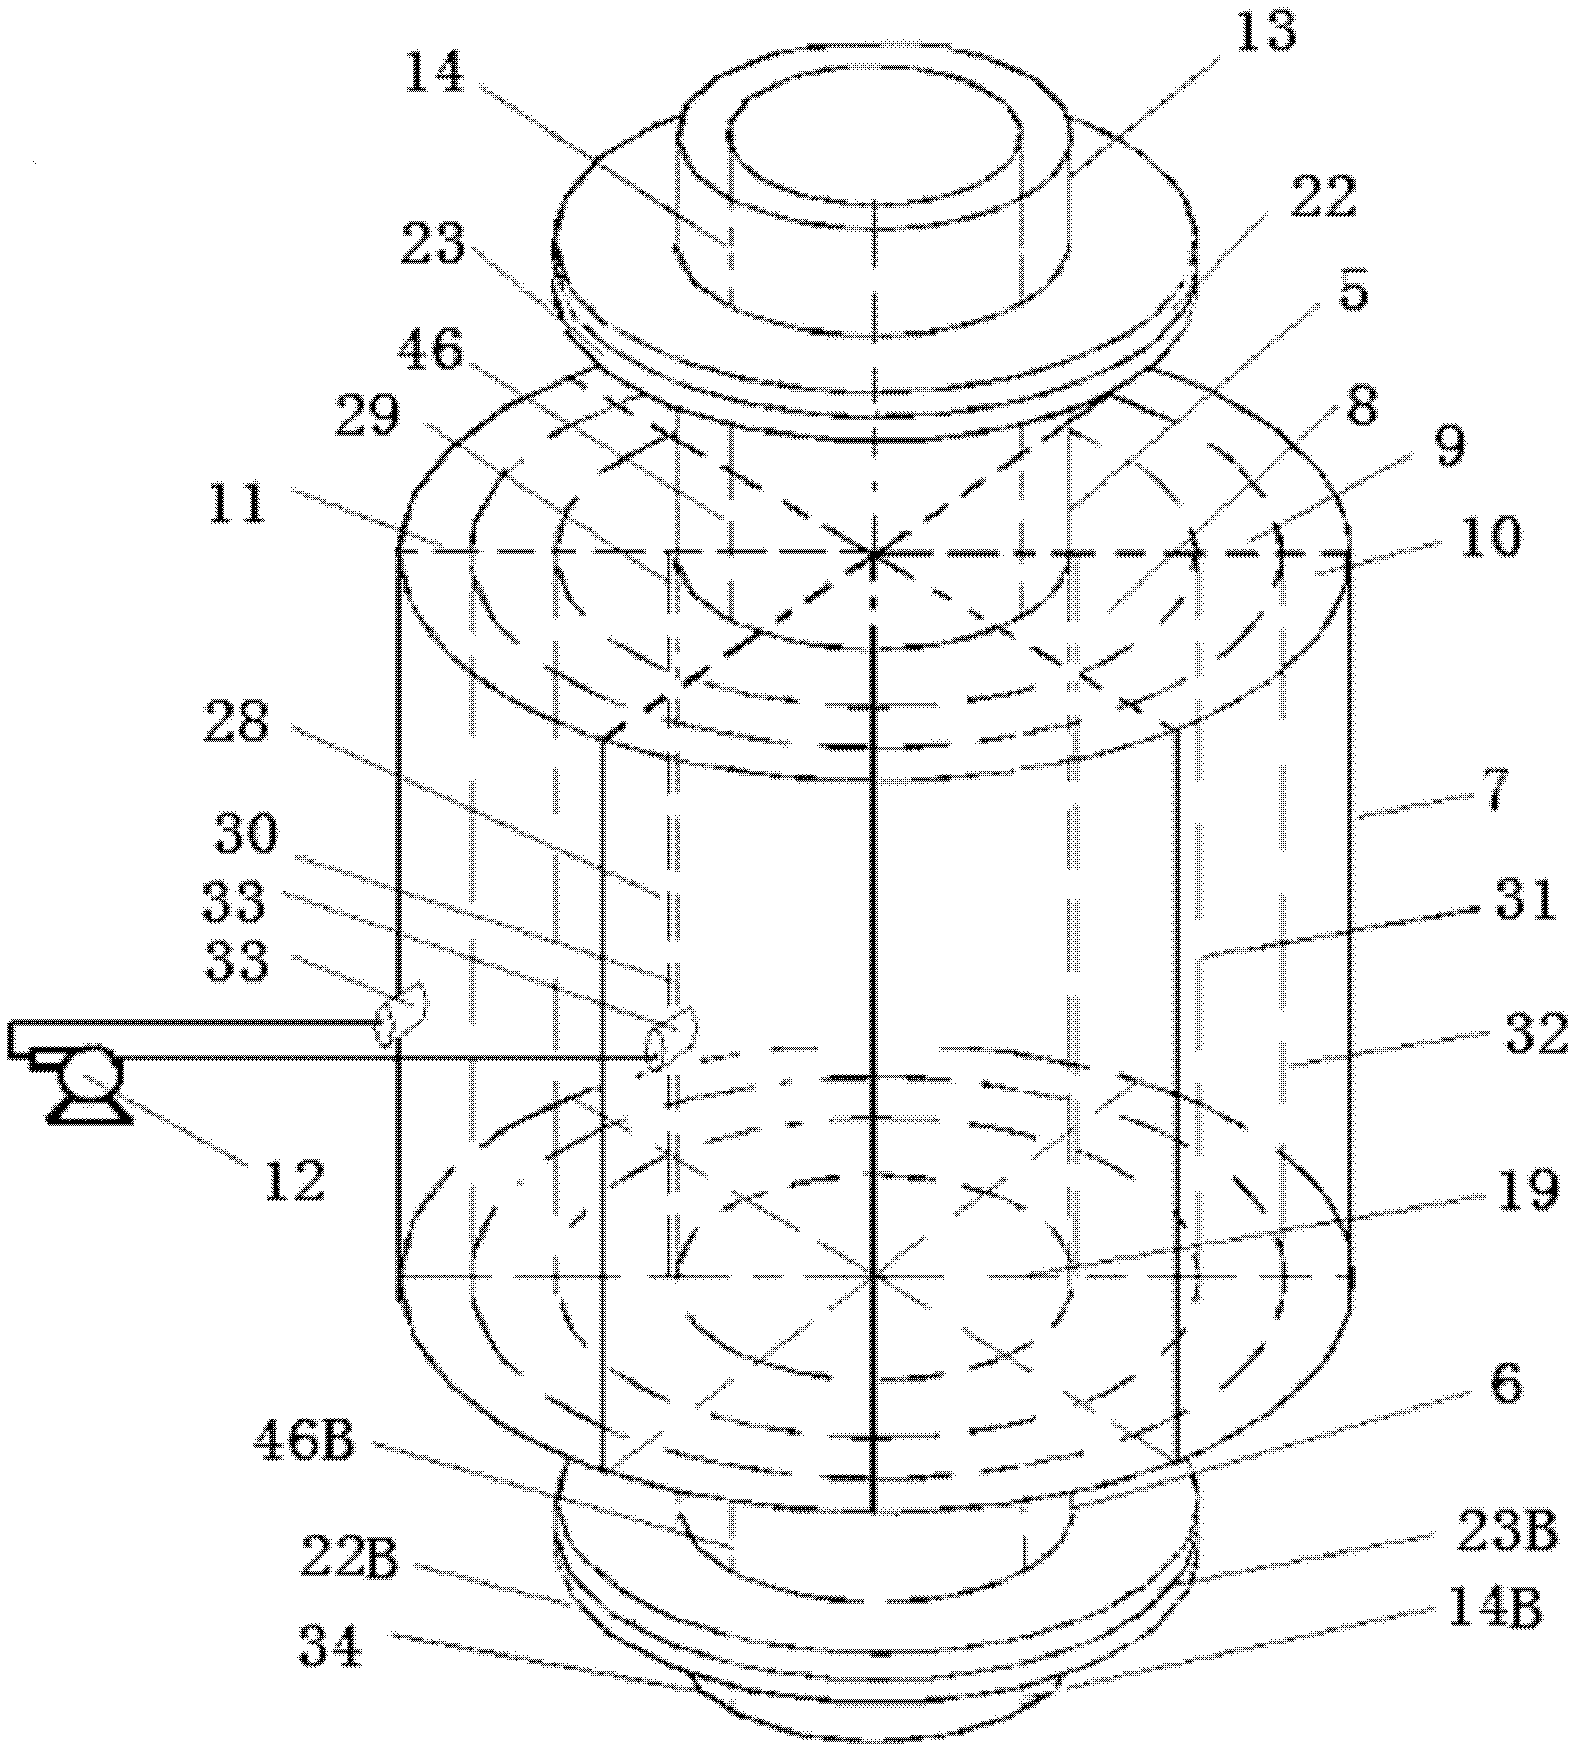 Simulated moving bed for chromatography device